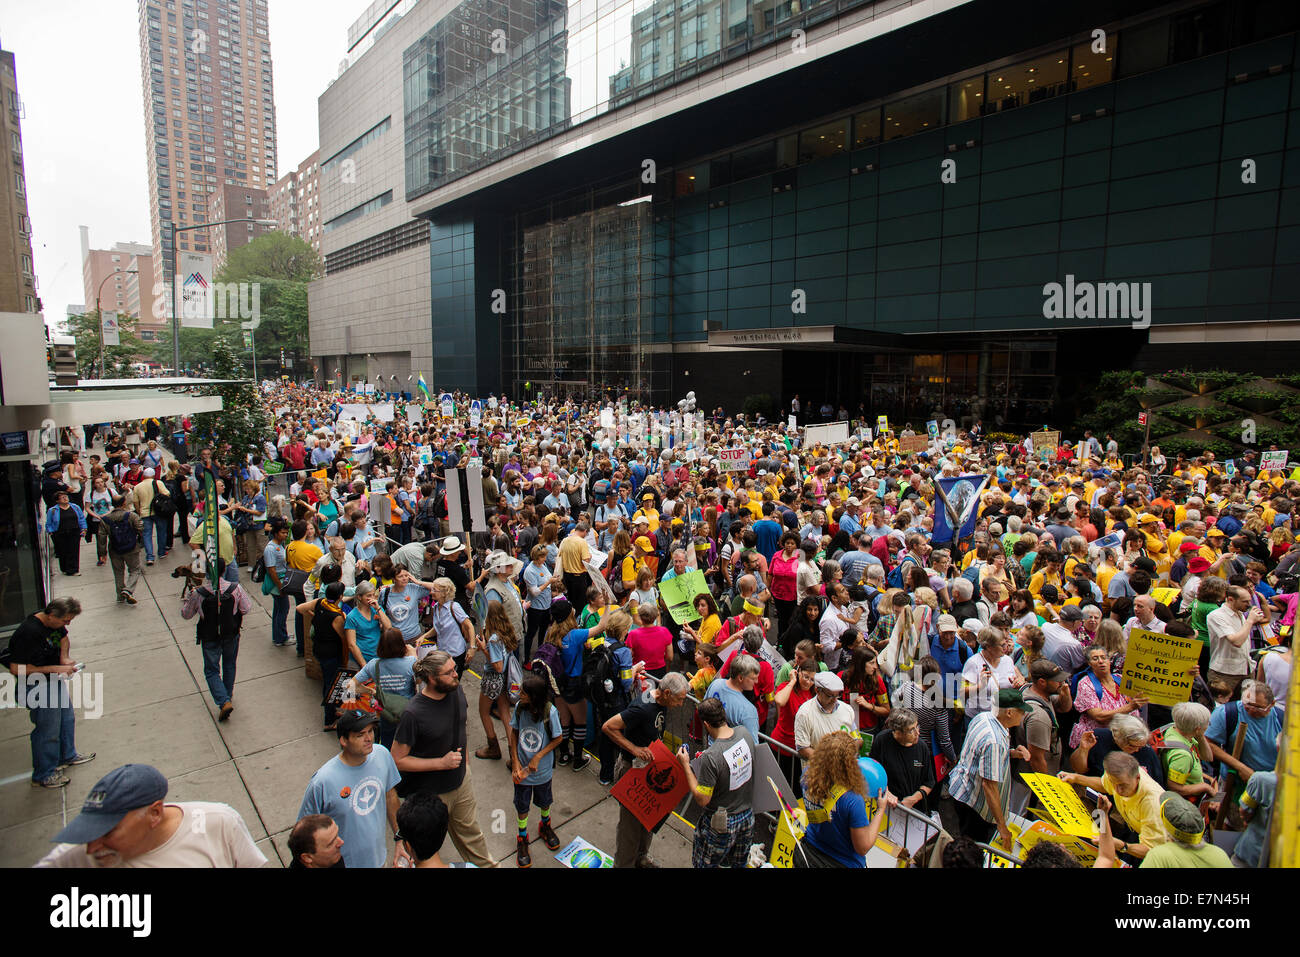 Climate Change March 22 September 2014 New York USA Stock Photo